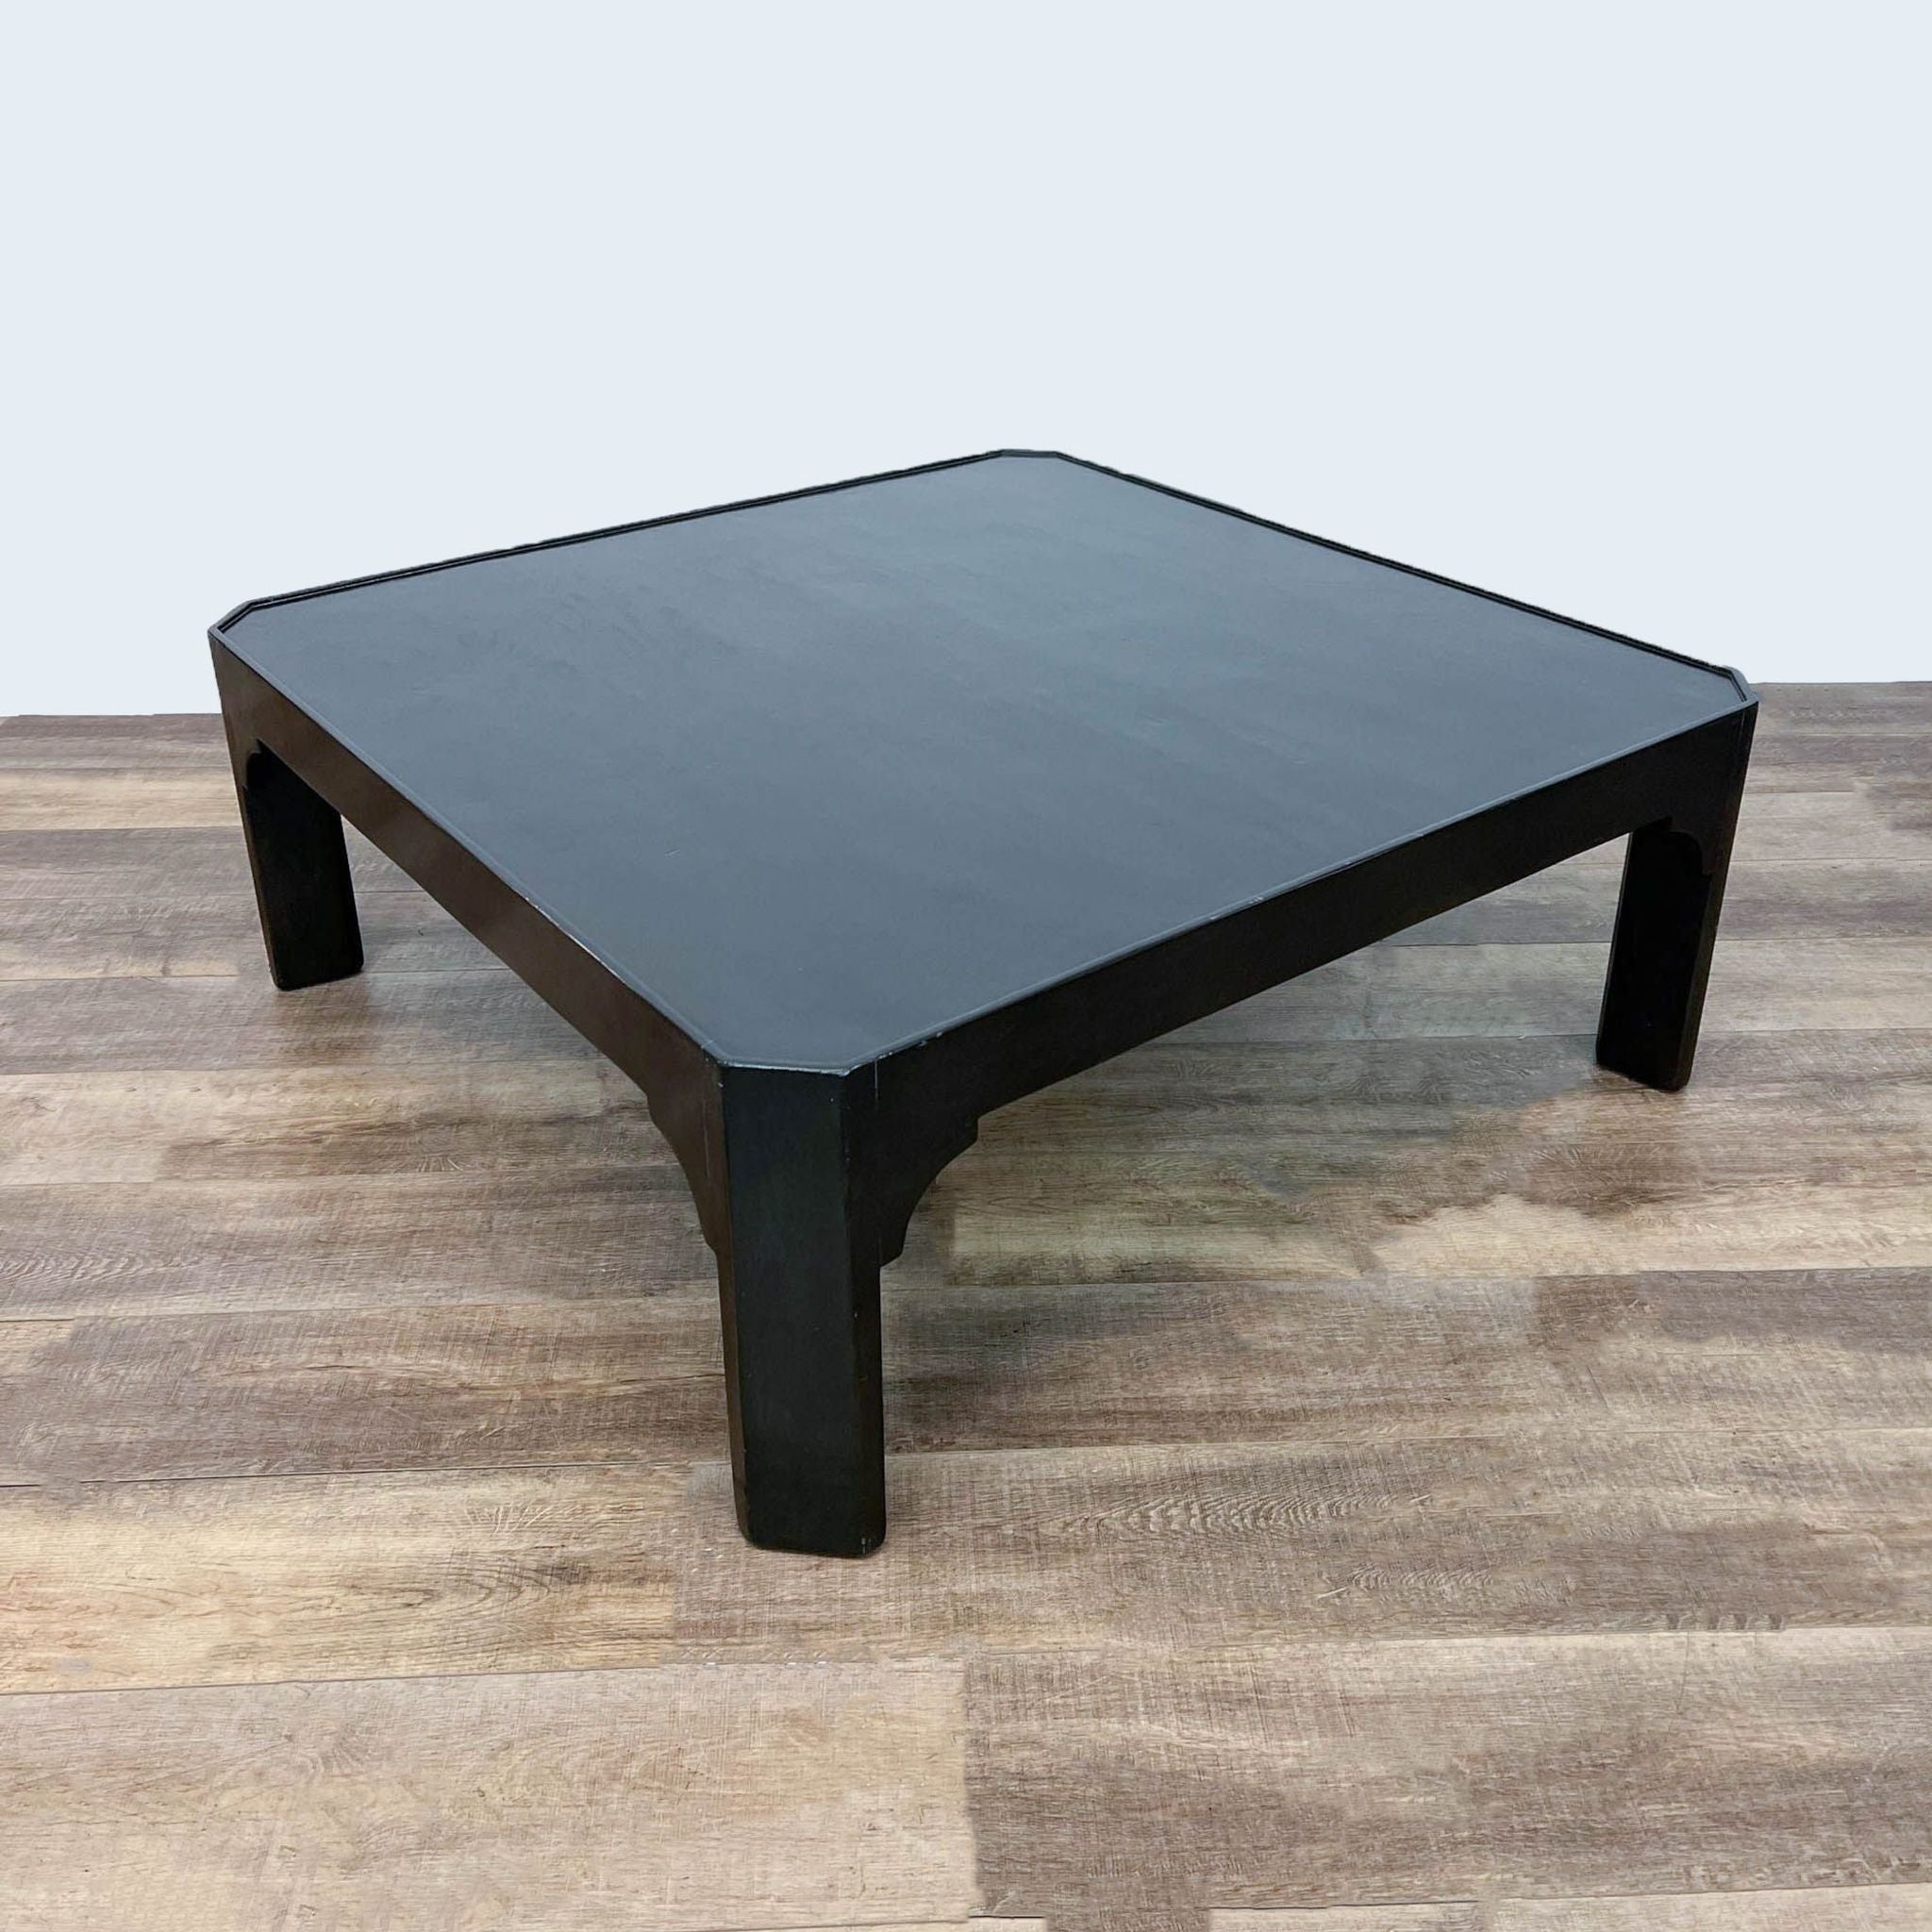 Black square Dennis & Leen coffee table on wooden flooring.